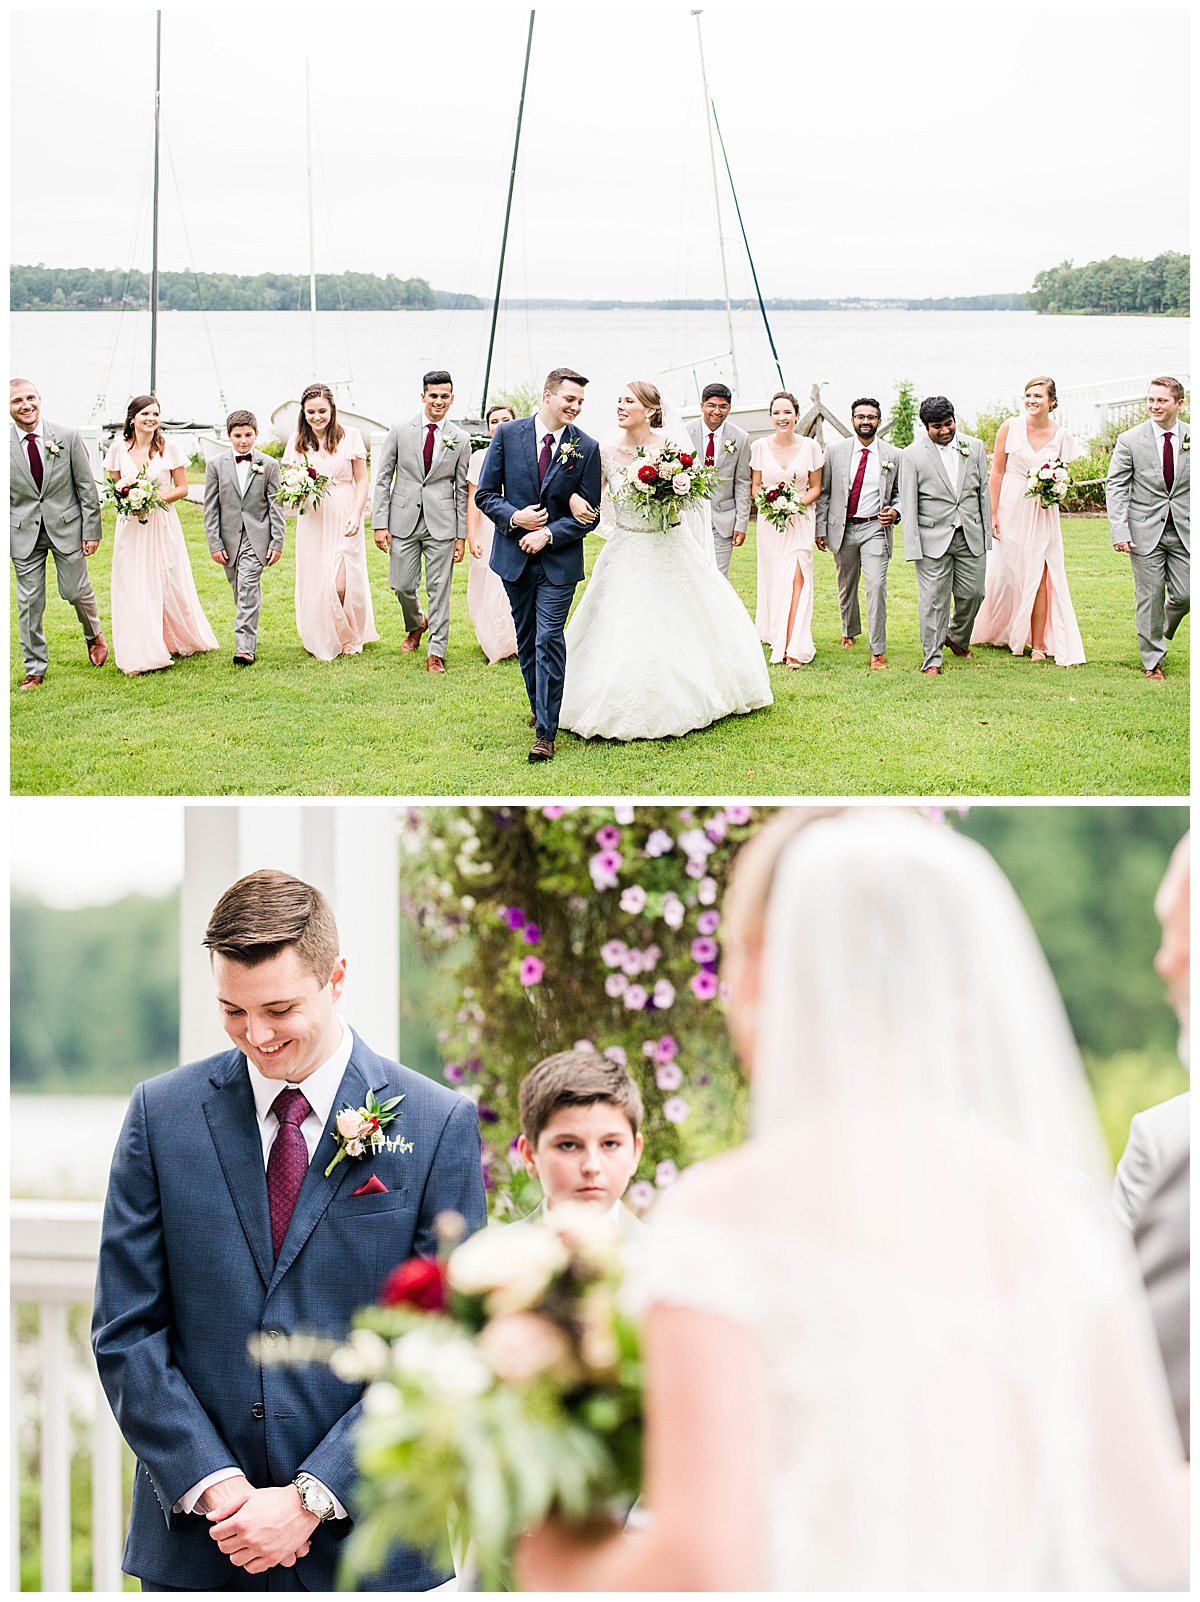 Boathouse at Sunday Park Wedding: wedding party, waterfront wedding venue, richmond, outdoor, groom smiling during ceremony